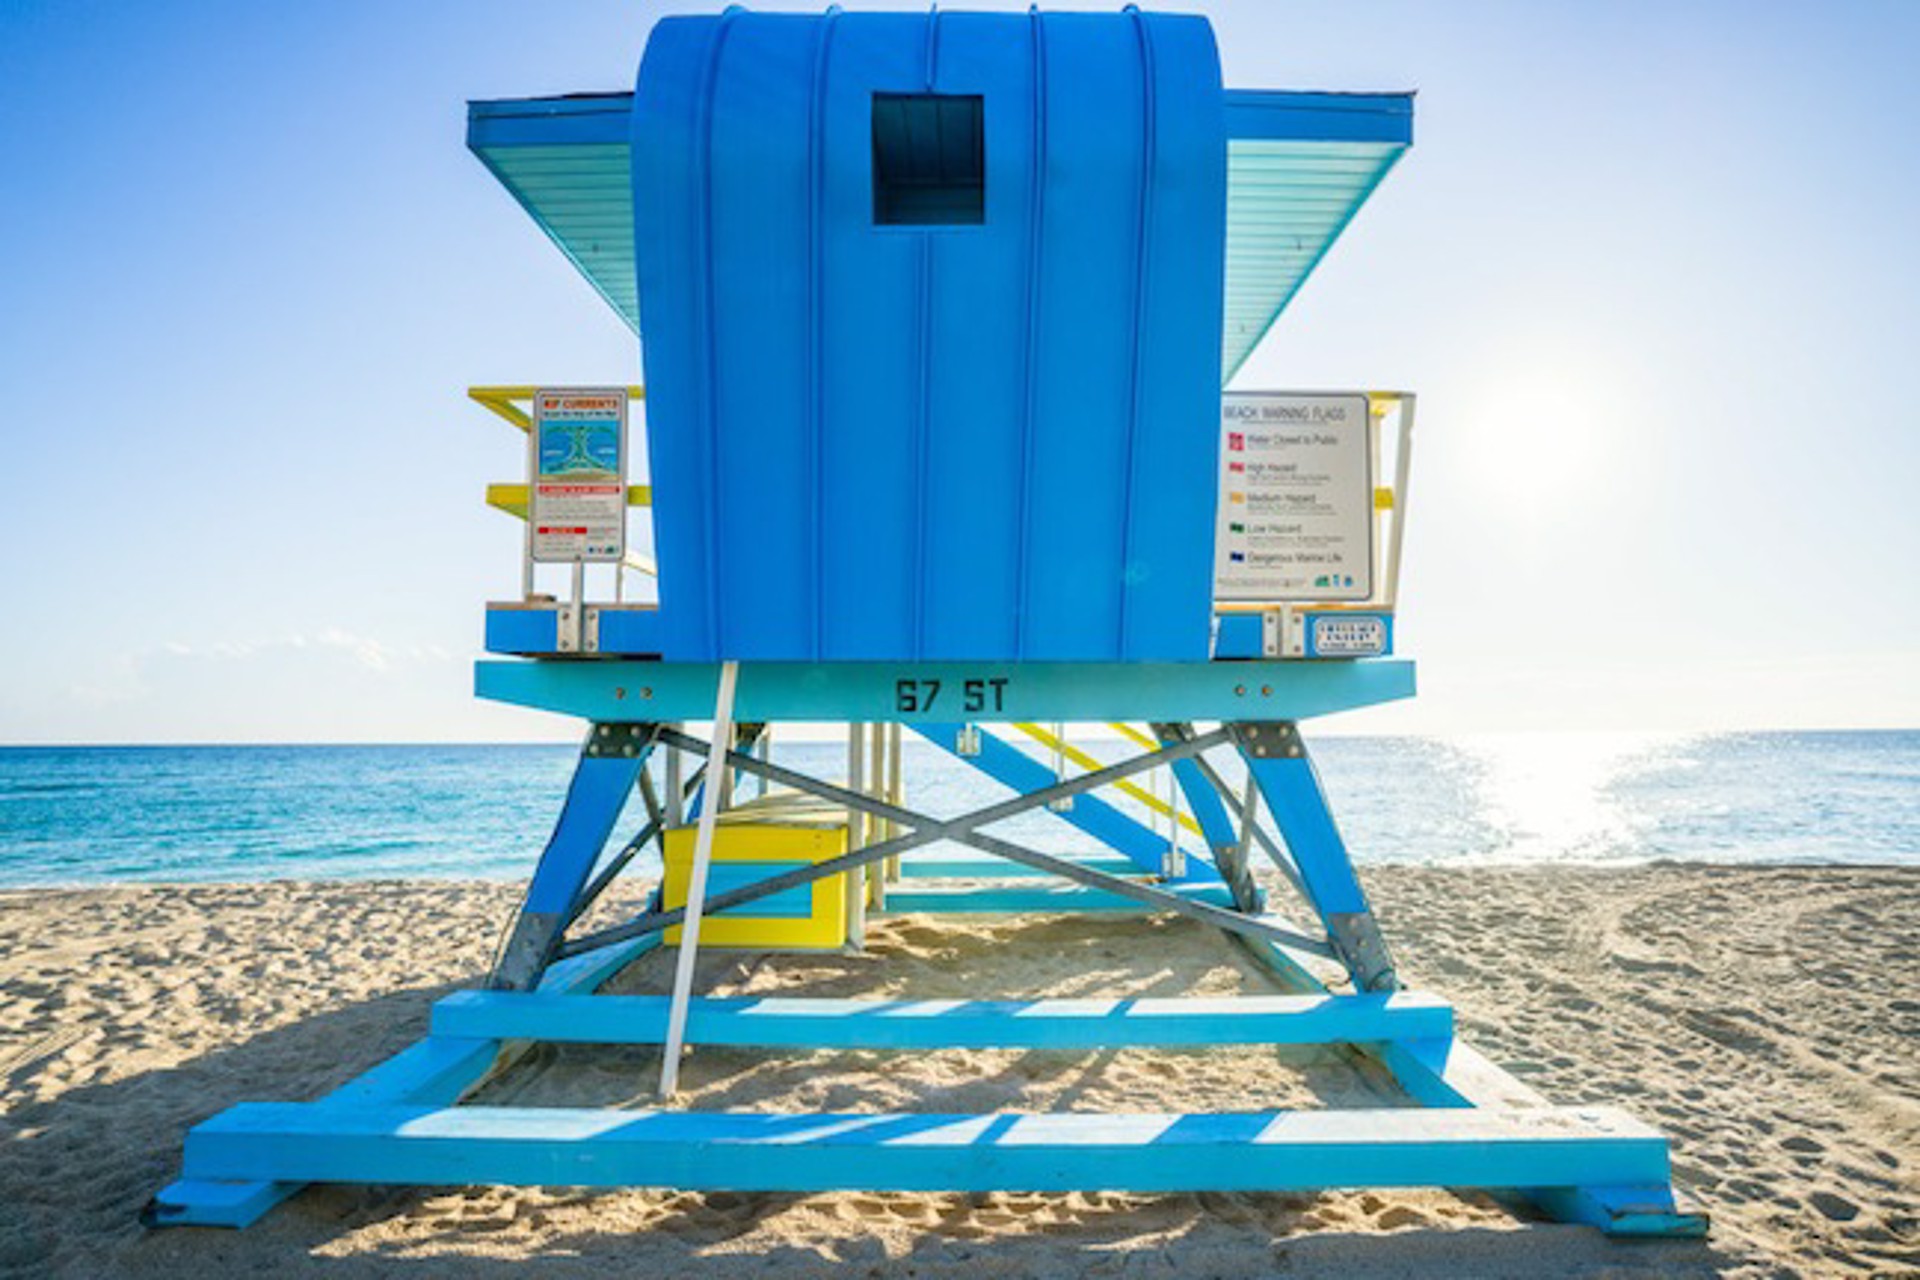 67th Street Lifeguard Stand, Rear View by Peter Mendelson